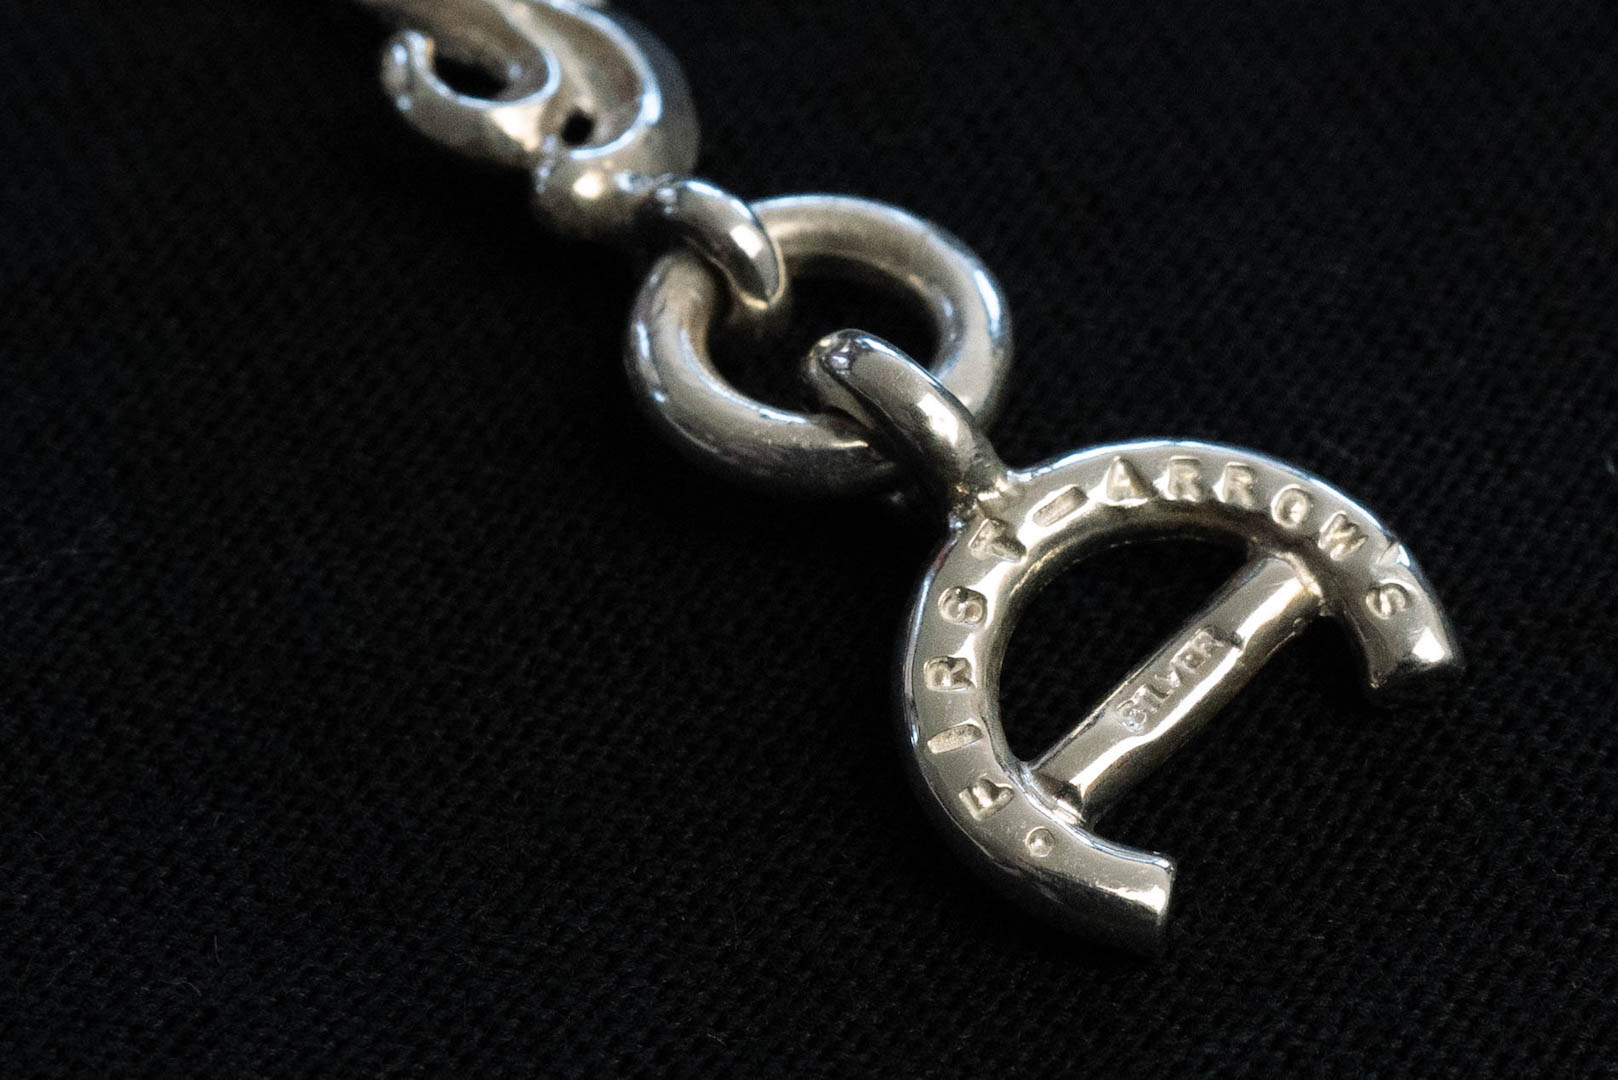 First Arrow's Customised "Ultimate Luxe" Arabesque Silver Chain (P-023)